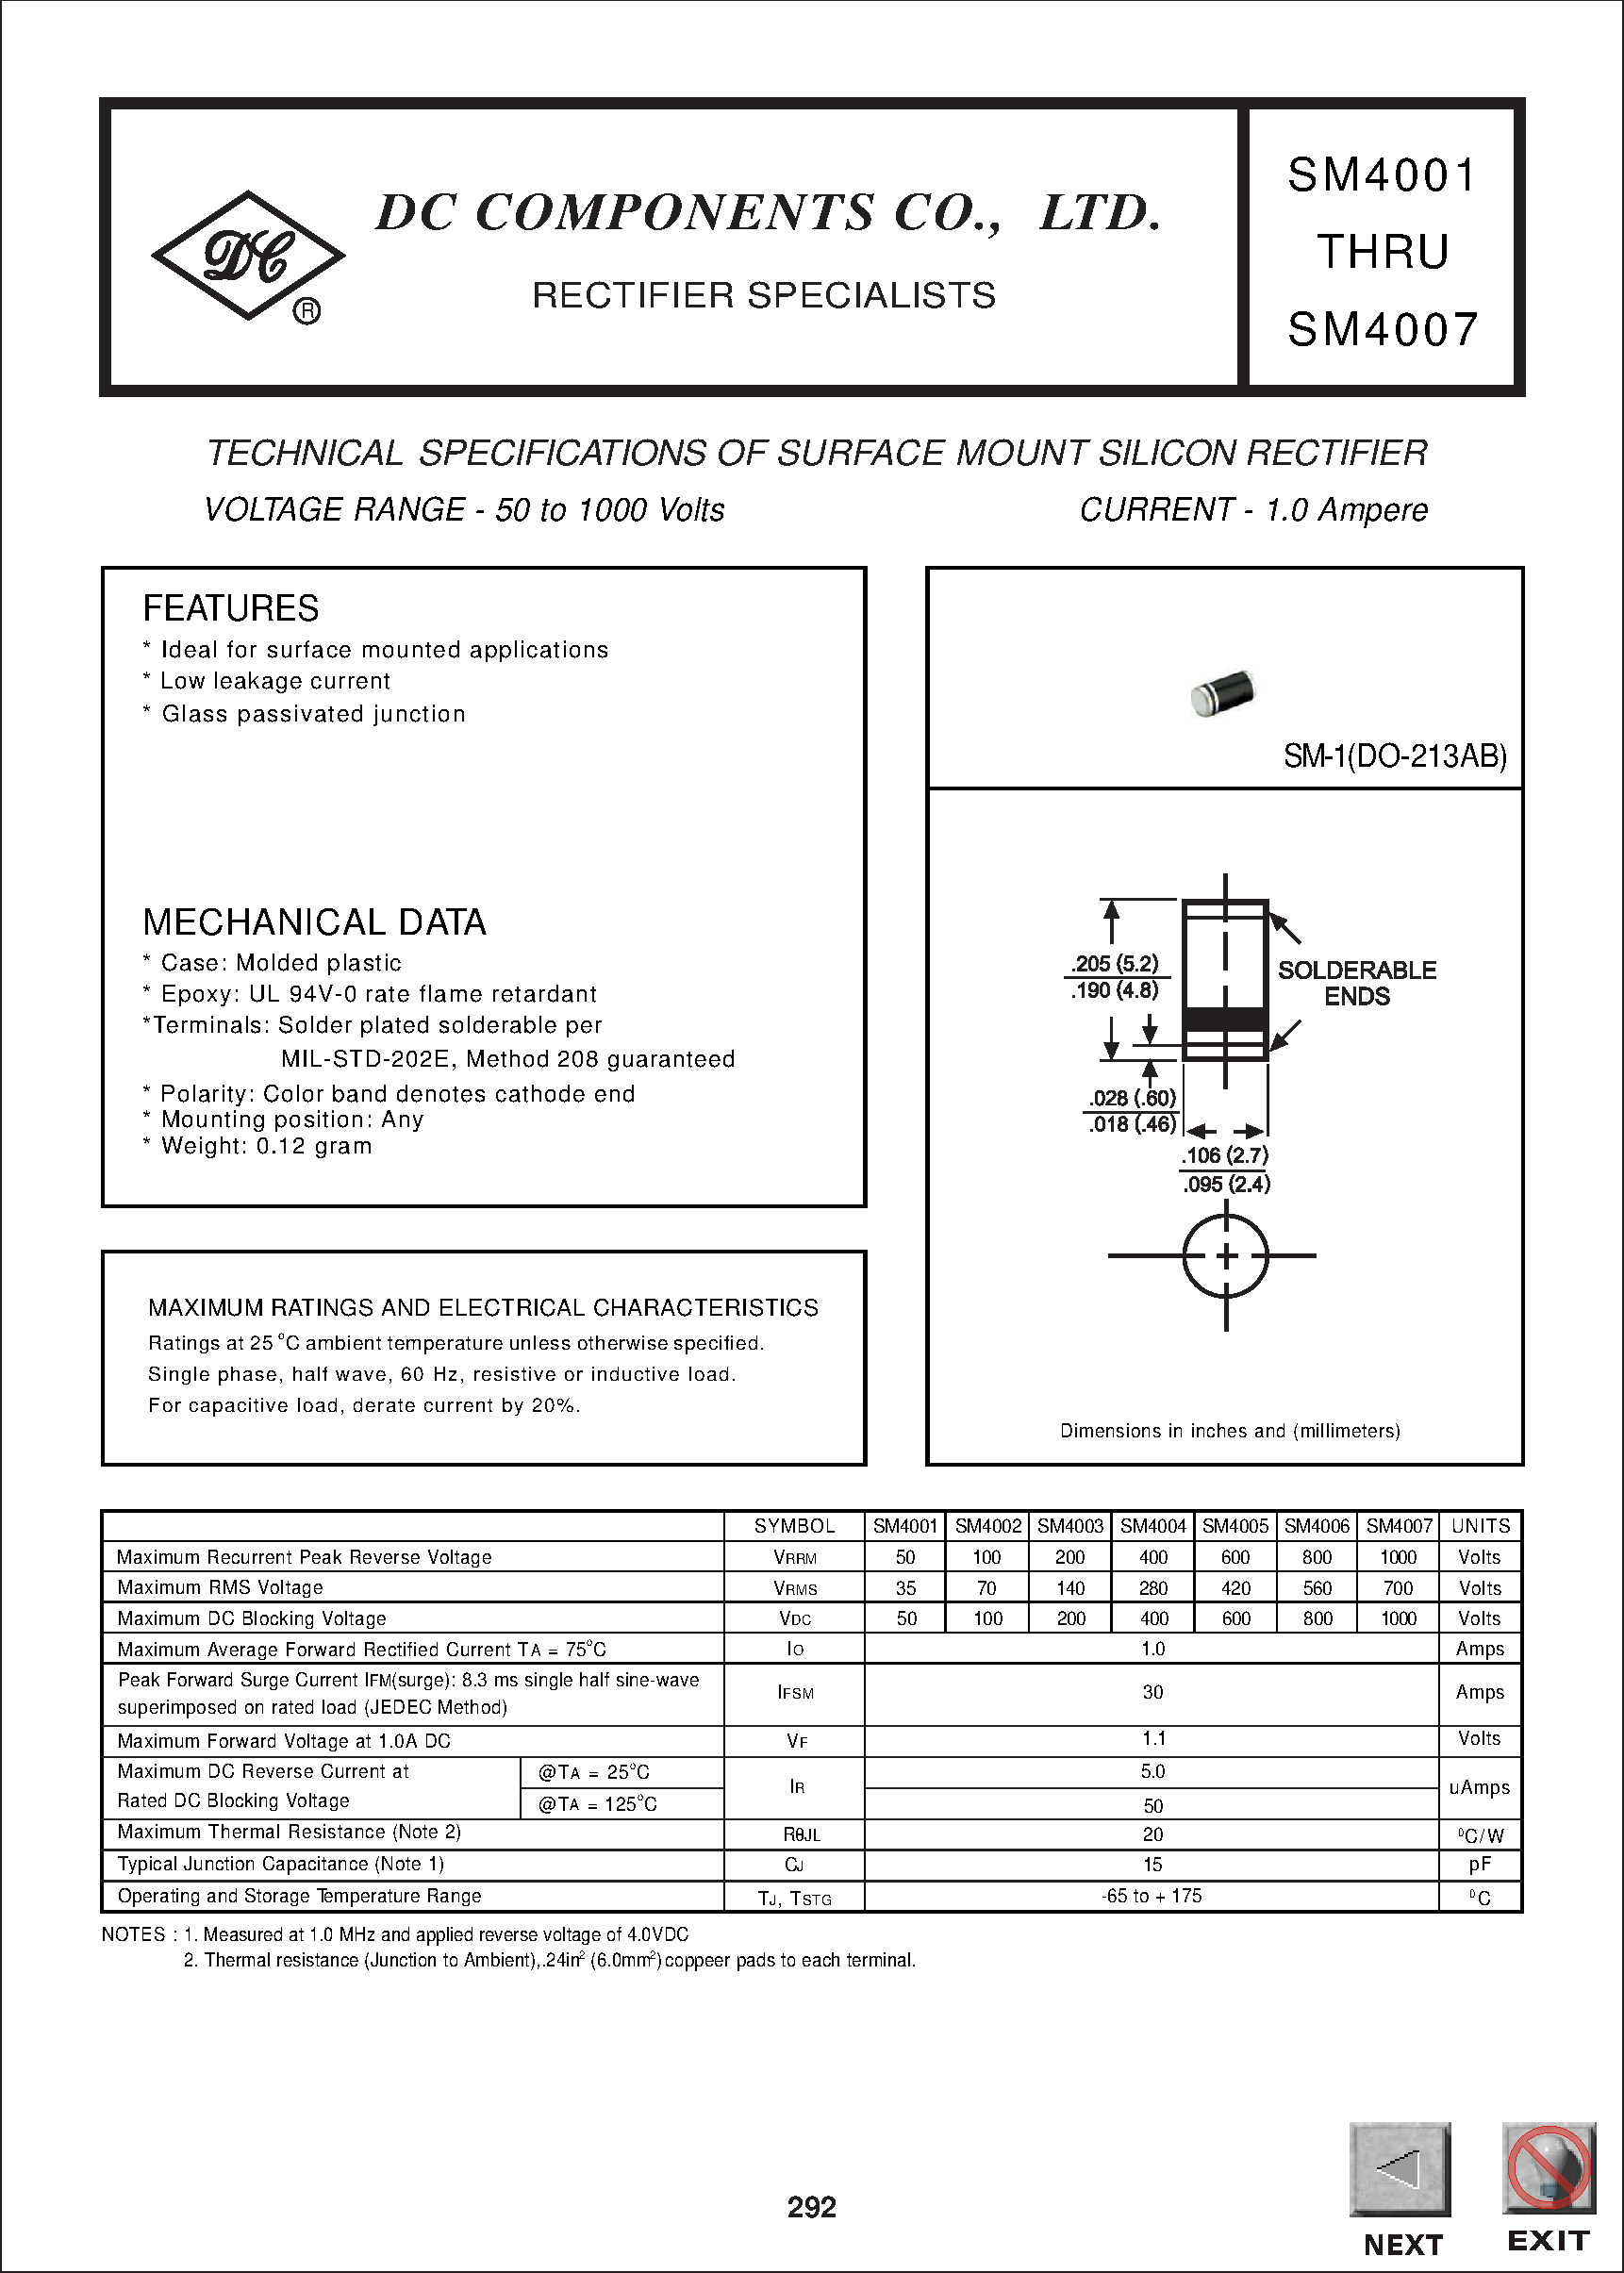 Даташит SM4004 - TECHNICAL SPECIFICATIONS OF SURFACE MOUNT SILICON RECTIFIER страница 1